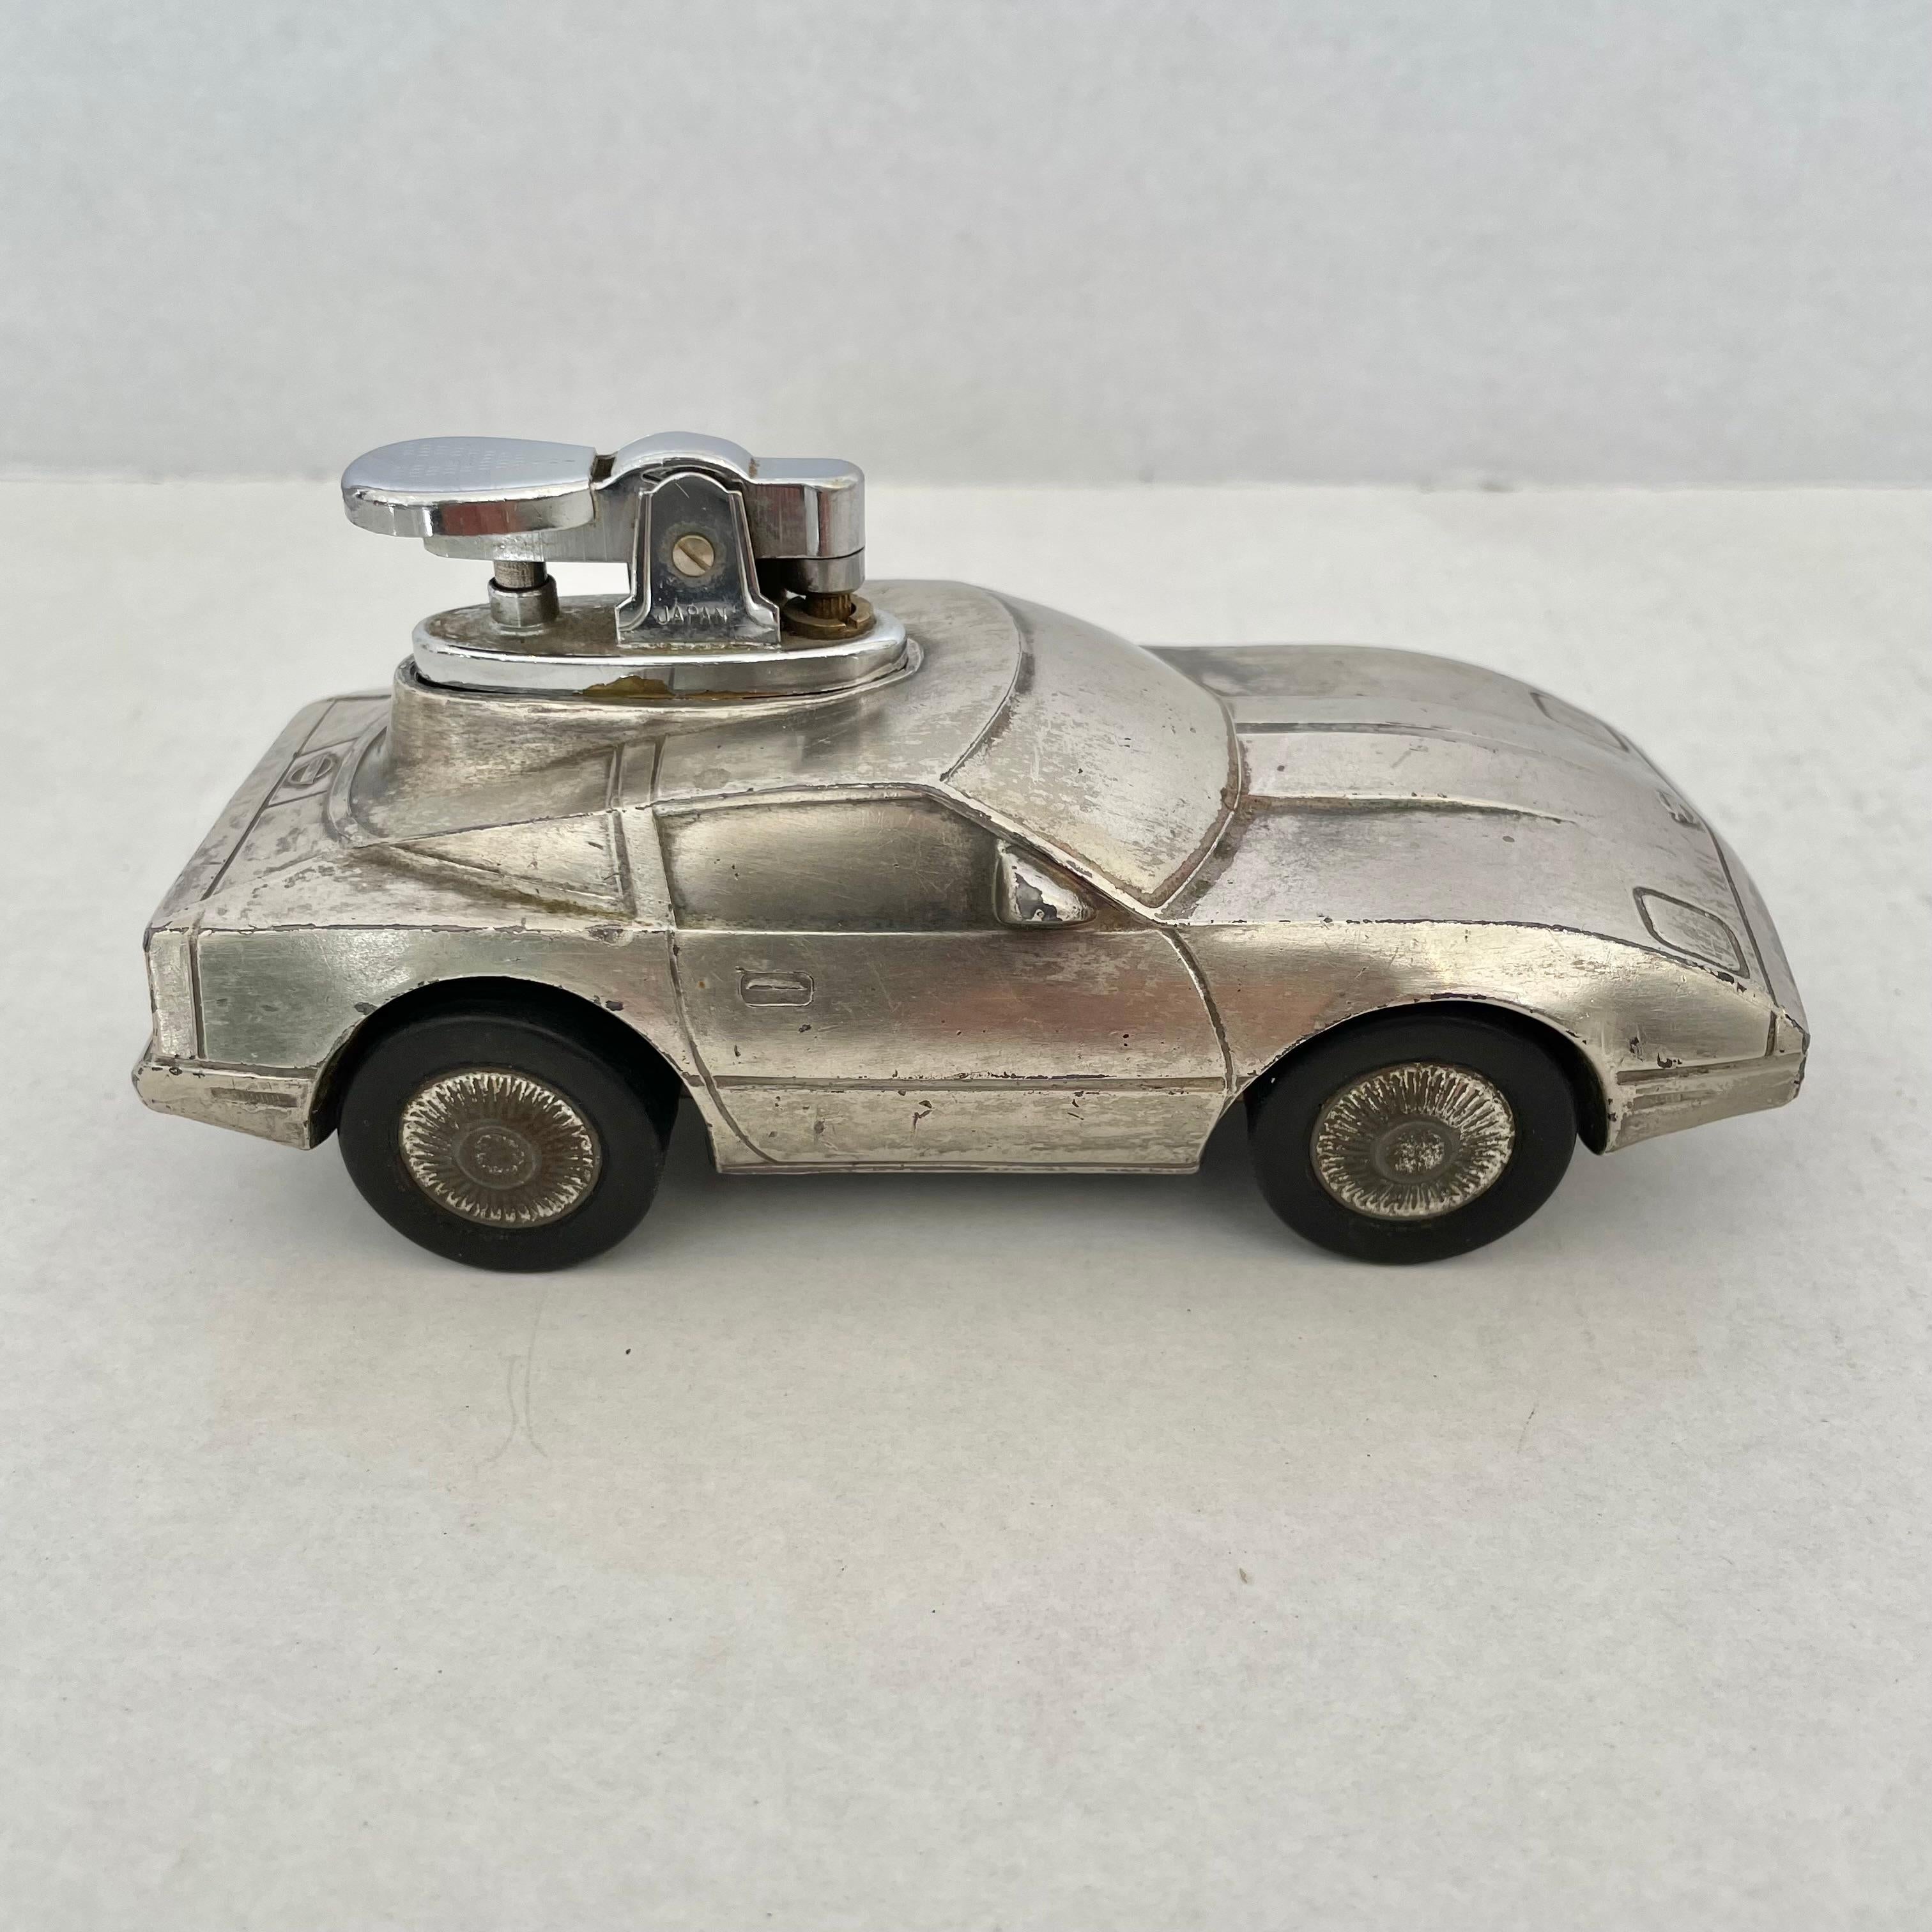 Cool vintage table lighter in the shape of a 1984 Corvette. Rubber wheels with tread detailing. License plate reads Corvette on the back and 1984 in the front. Cool tobacco accessory and conversation piece. Working lighter. Good vintage condition.